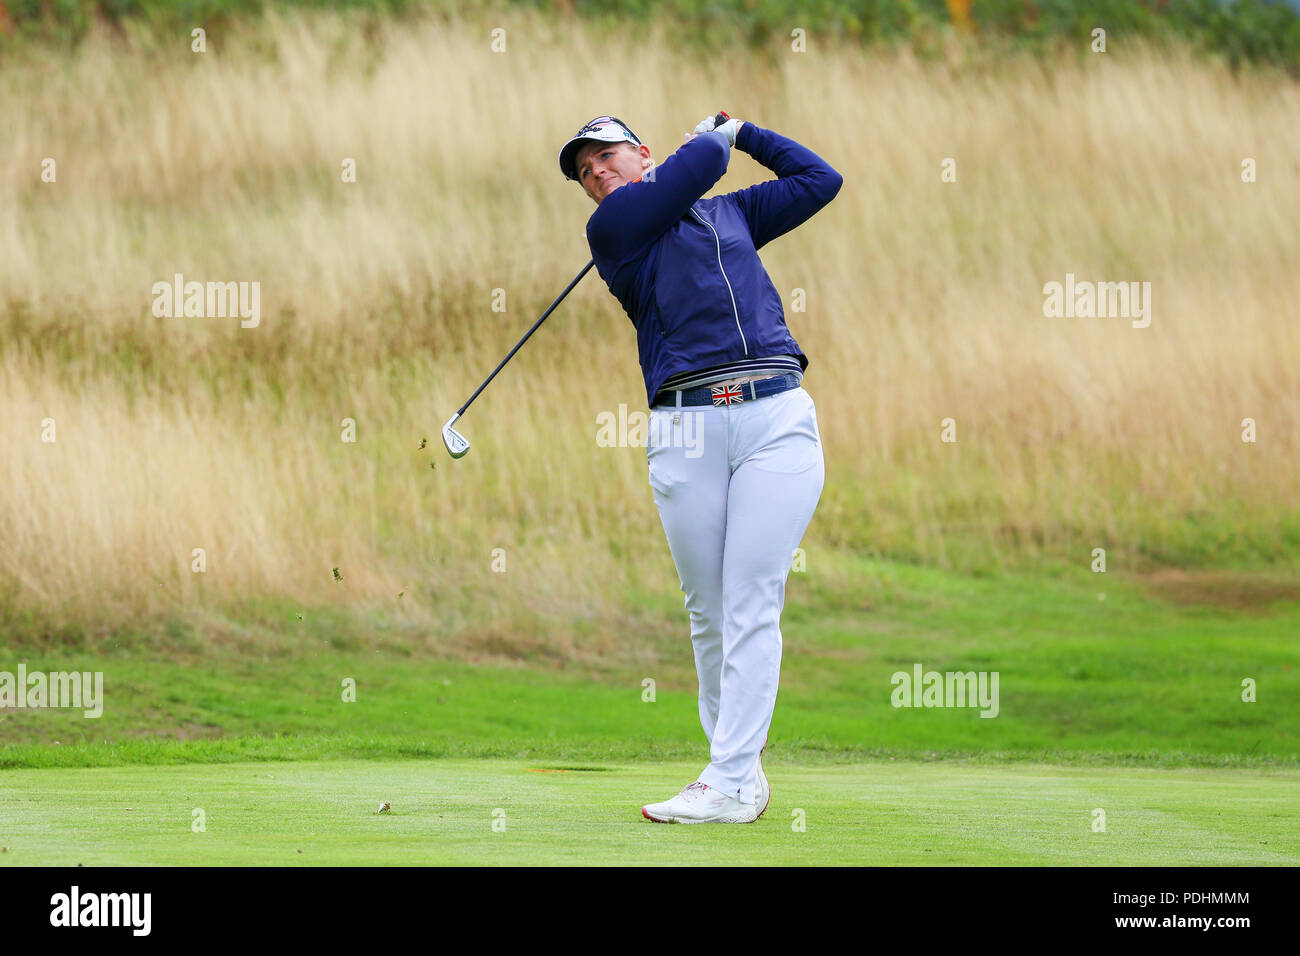 Gleneagles, Scotland, UK. 10th August, 2018. The Fourball Match Play continues with the pairing of Catriona Matthew and Holly Clyburn representing Great Britain playing against Cajsa Persson and Linda Wessberg of Sweden. Clyburn playing her tee shot at the 5th Credit: Findlay/Alamy Live News Stock Photo